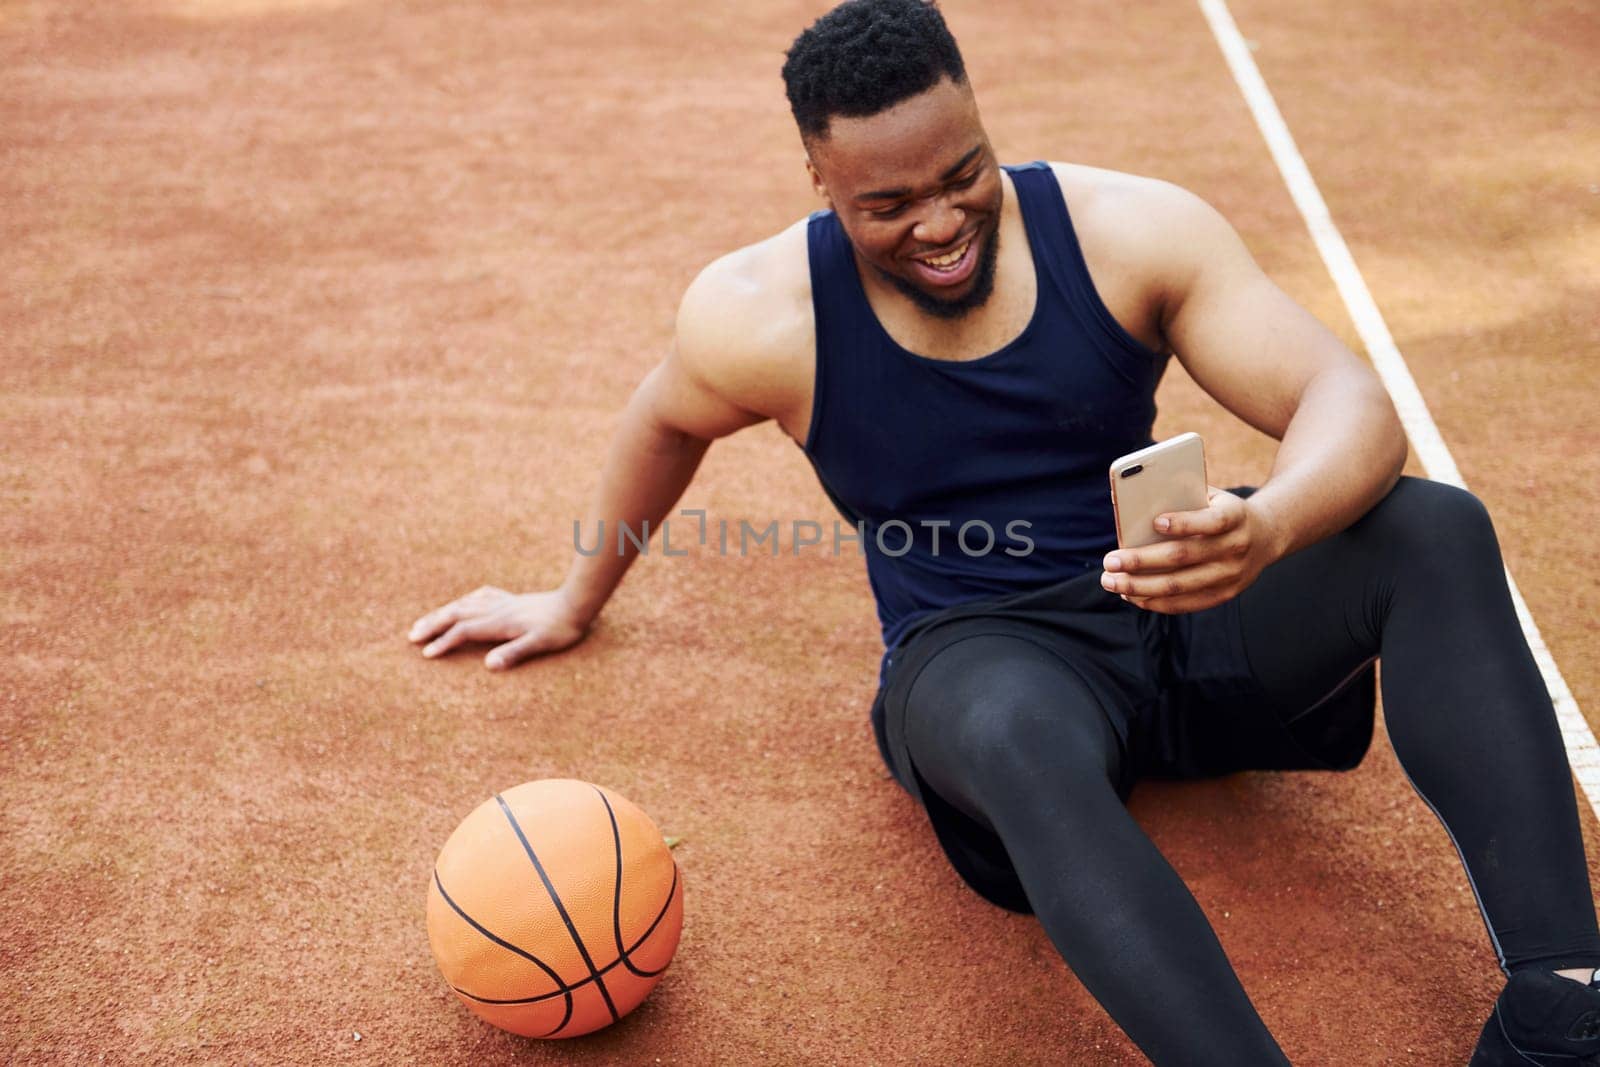 Using phone. African american man plays basketball on the court outdoors by Standret